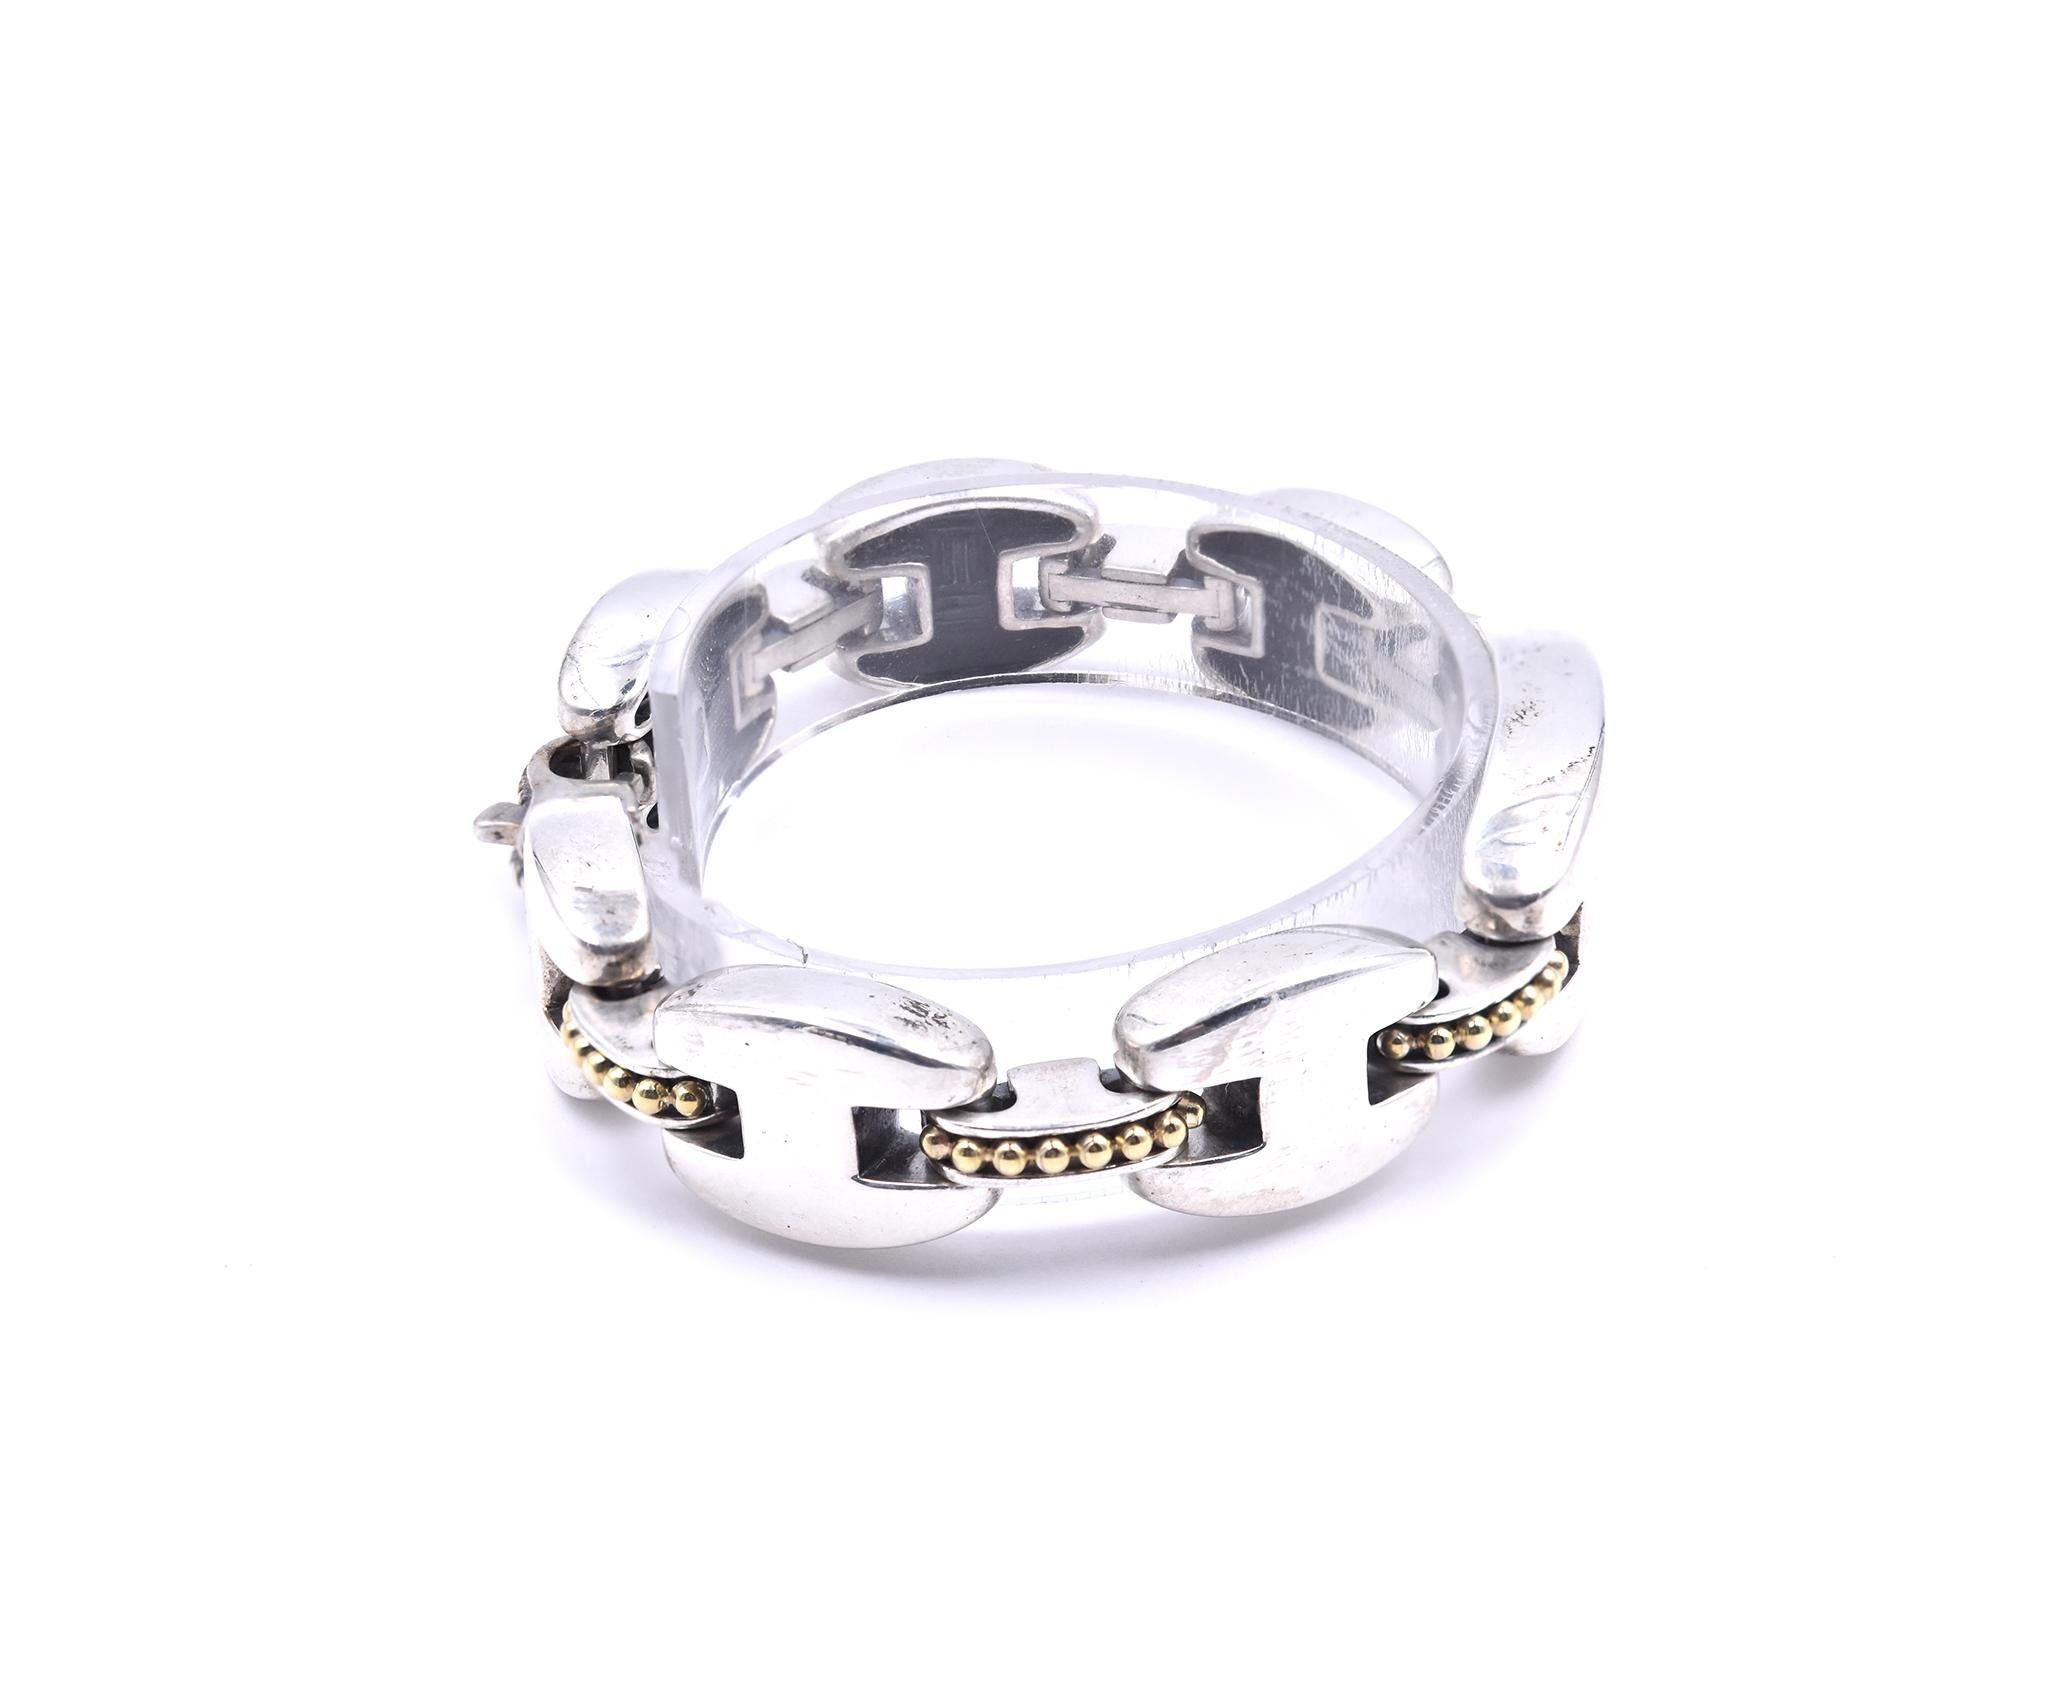 Designer: Lagos
Material: Sterling Silver / 18K yellow gold 
Dimensions: bracelet measures 7.5-inches
Weight: 53.39 grams
